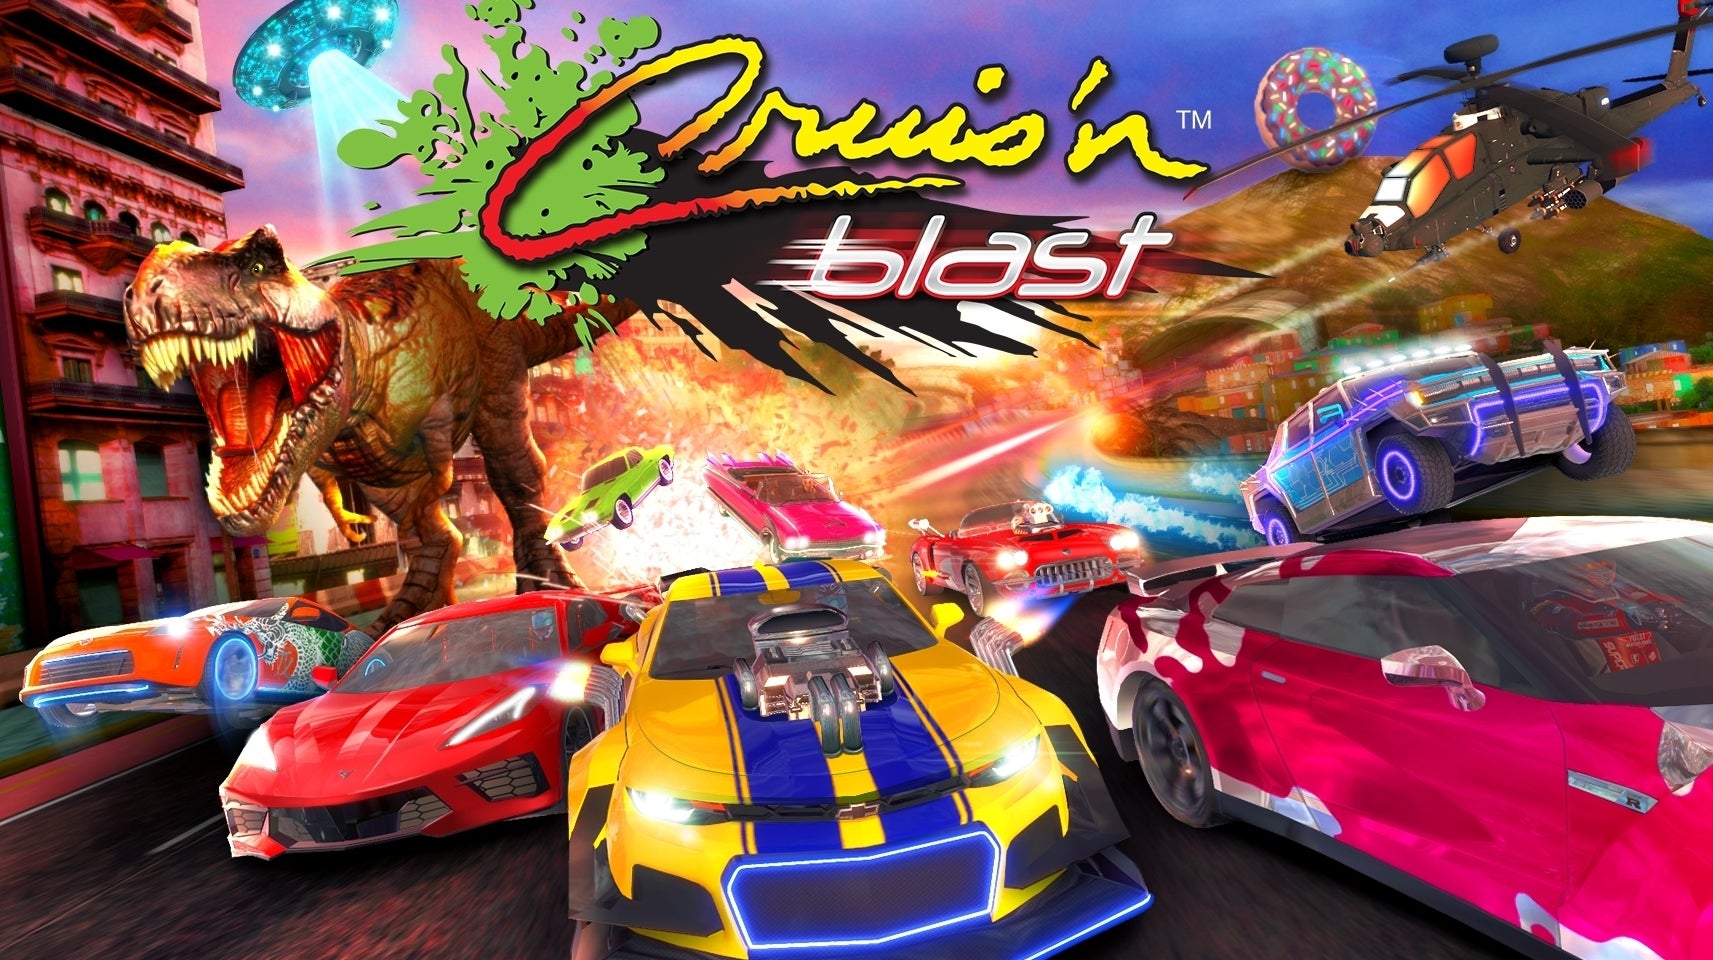 Image for Cruis'n Blast review - an arcade legend comes home